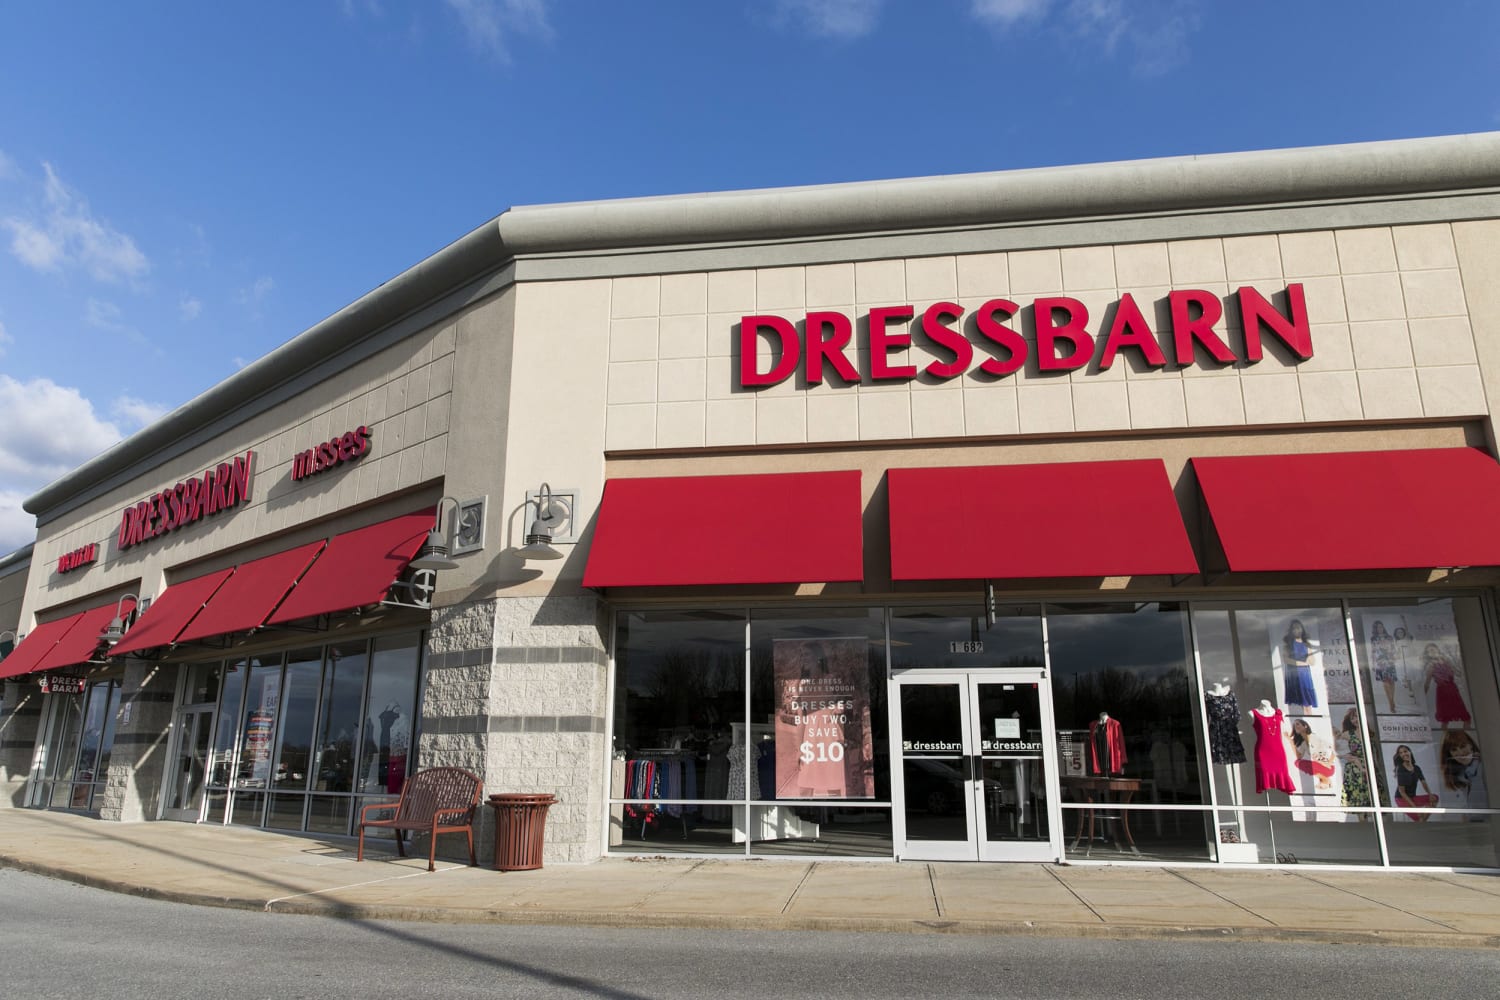 Dressbarn To Close All 650 Stores, Shutter Entire Business